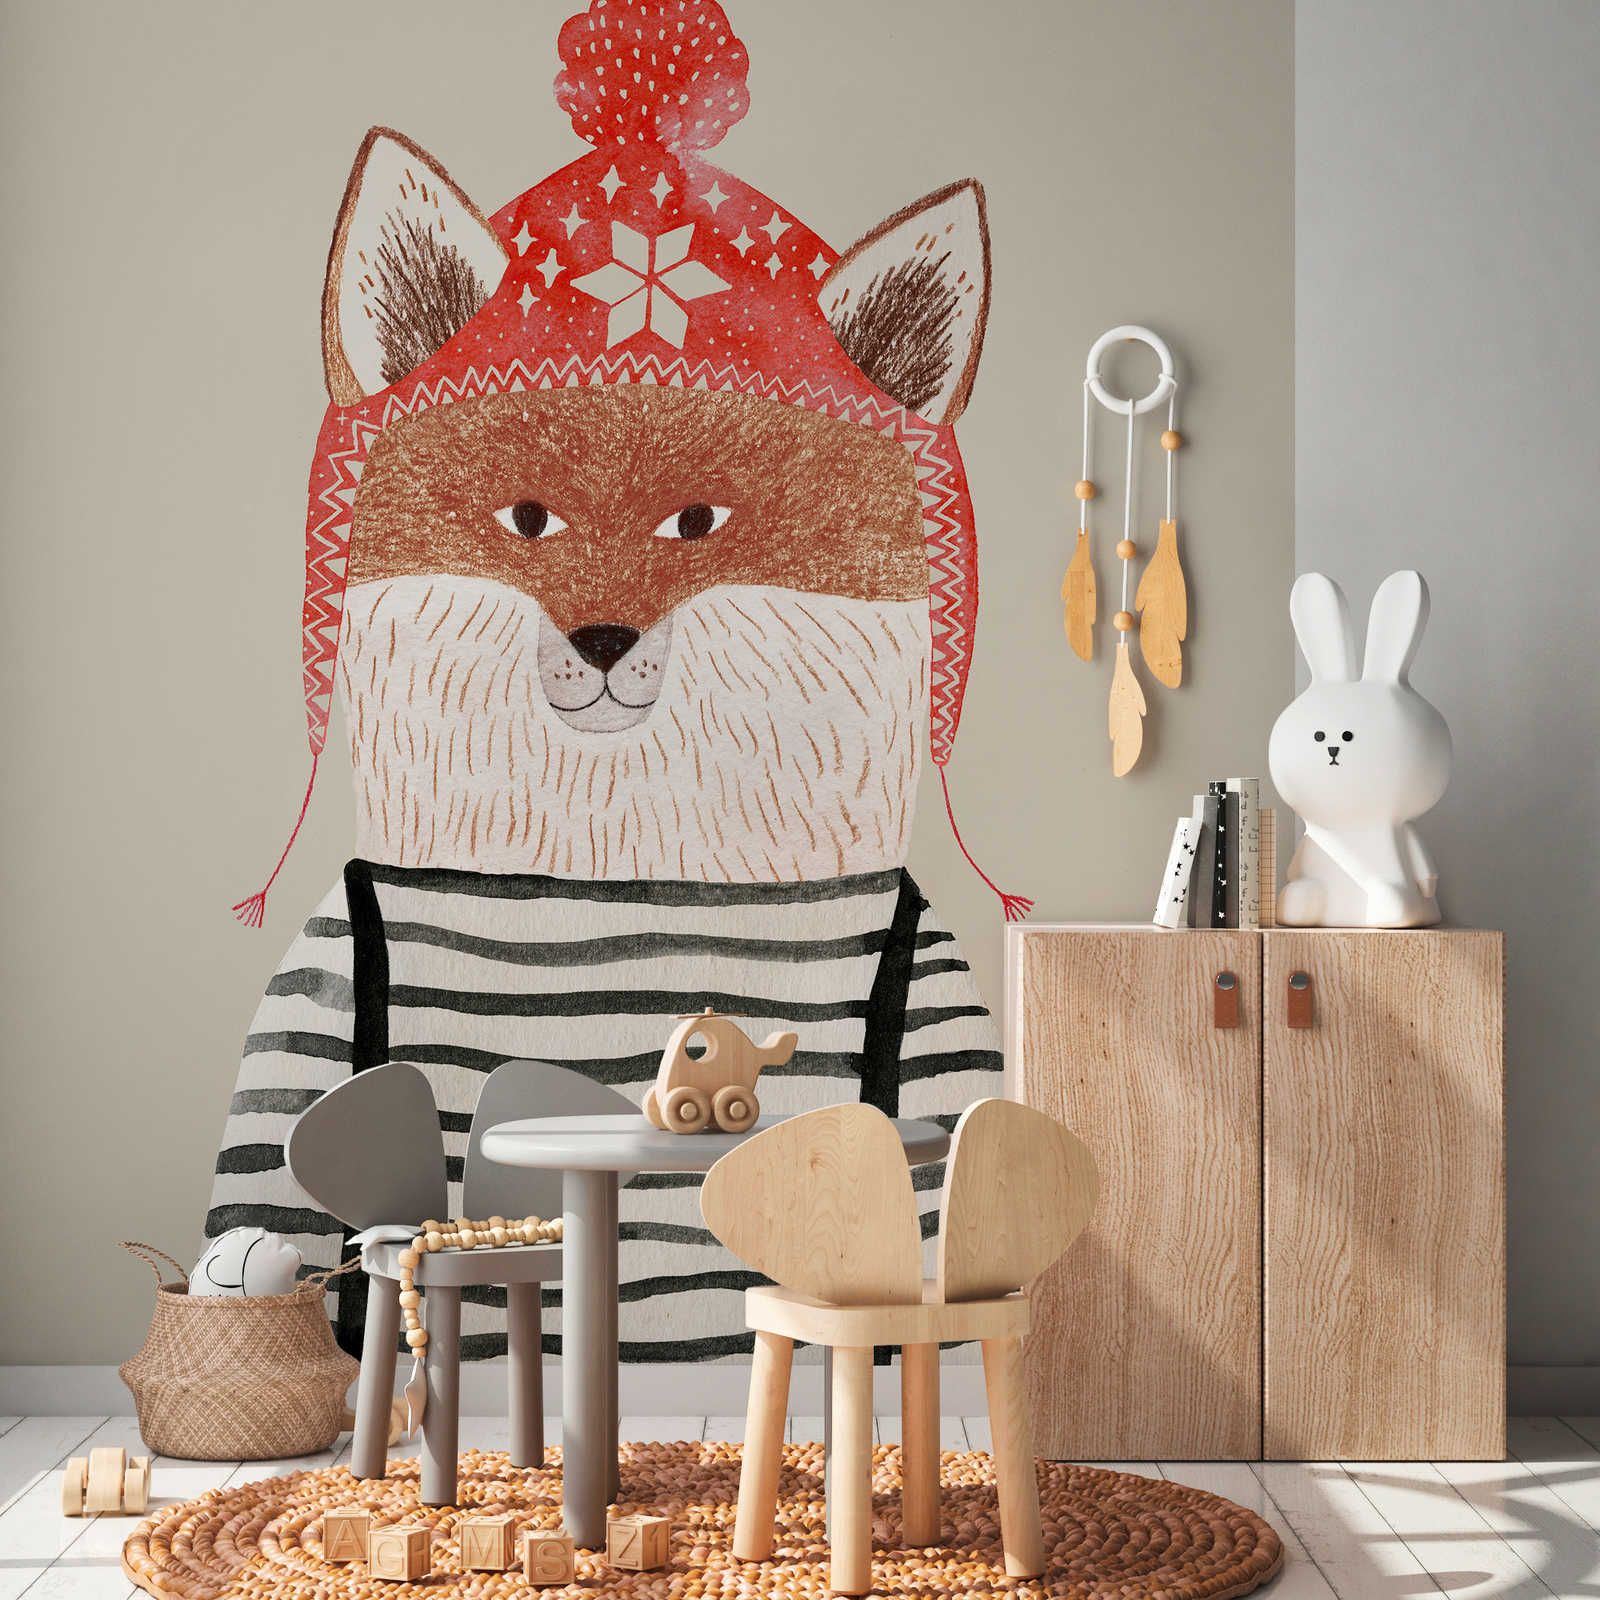         Fox with pom-pom hat mural - Smooth & slightly shiny non-woven
    